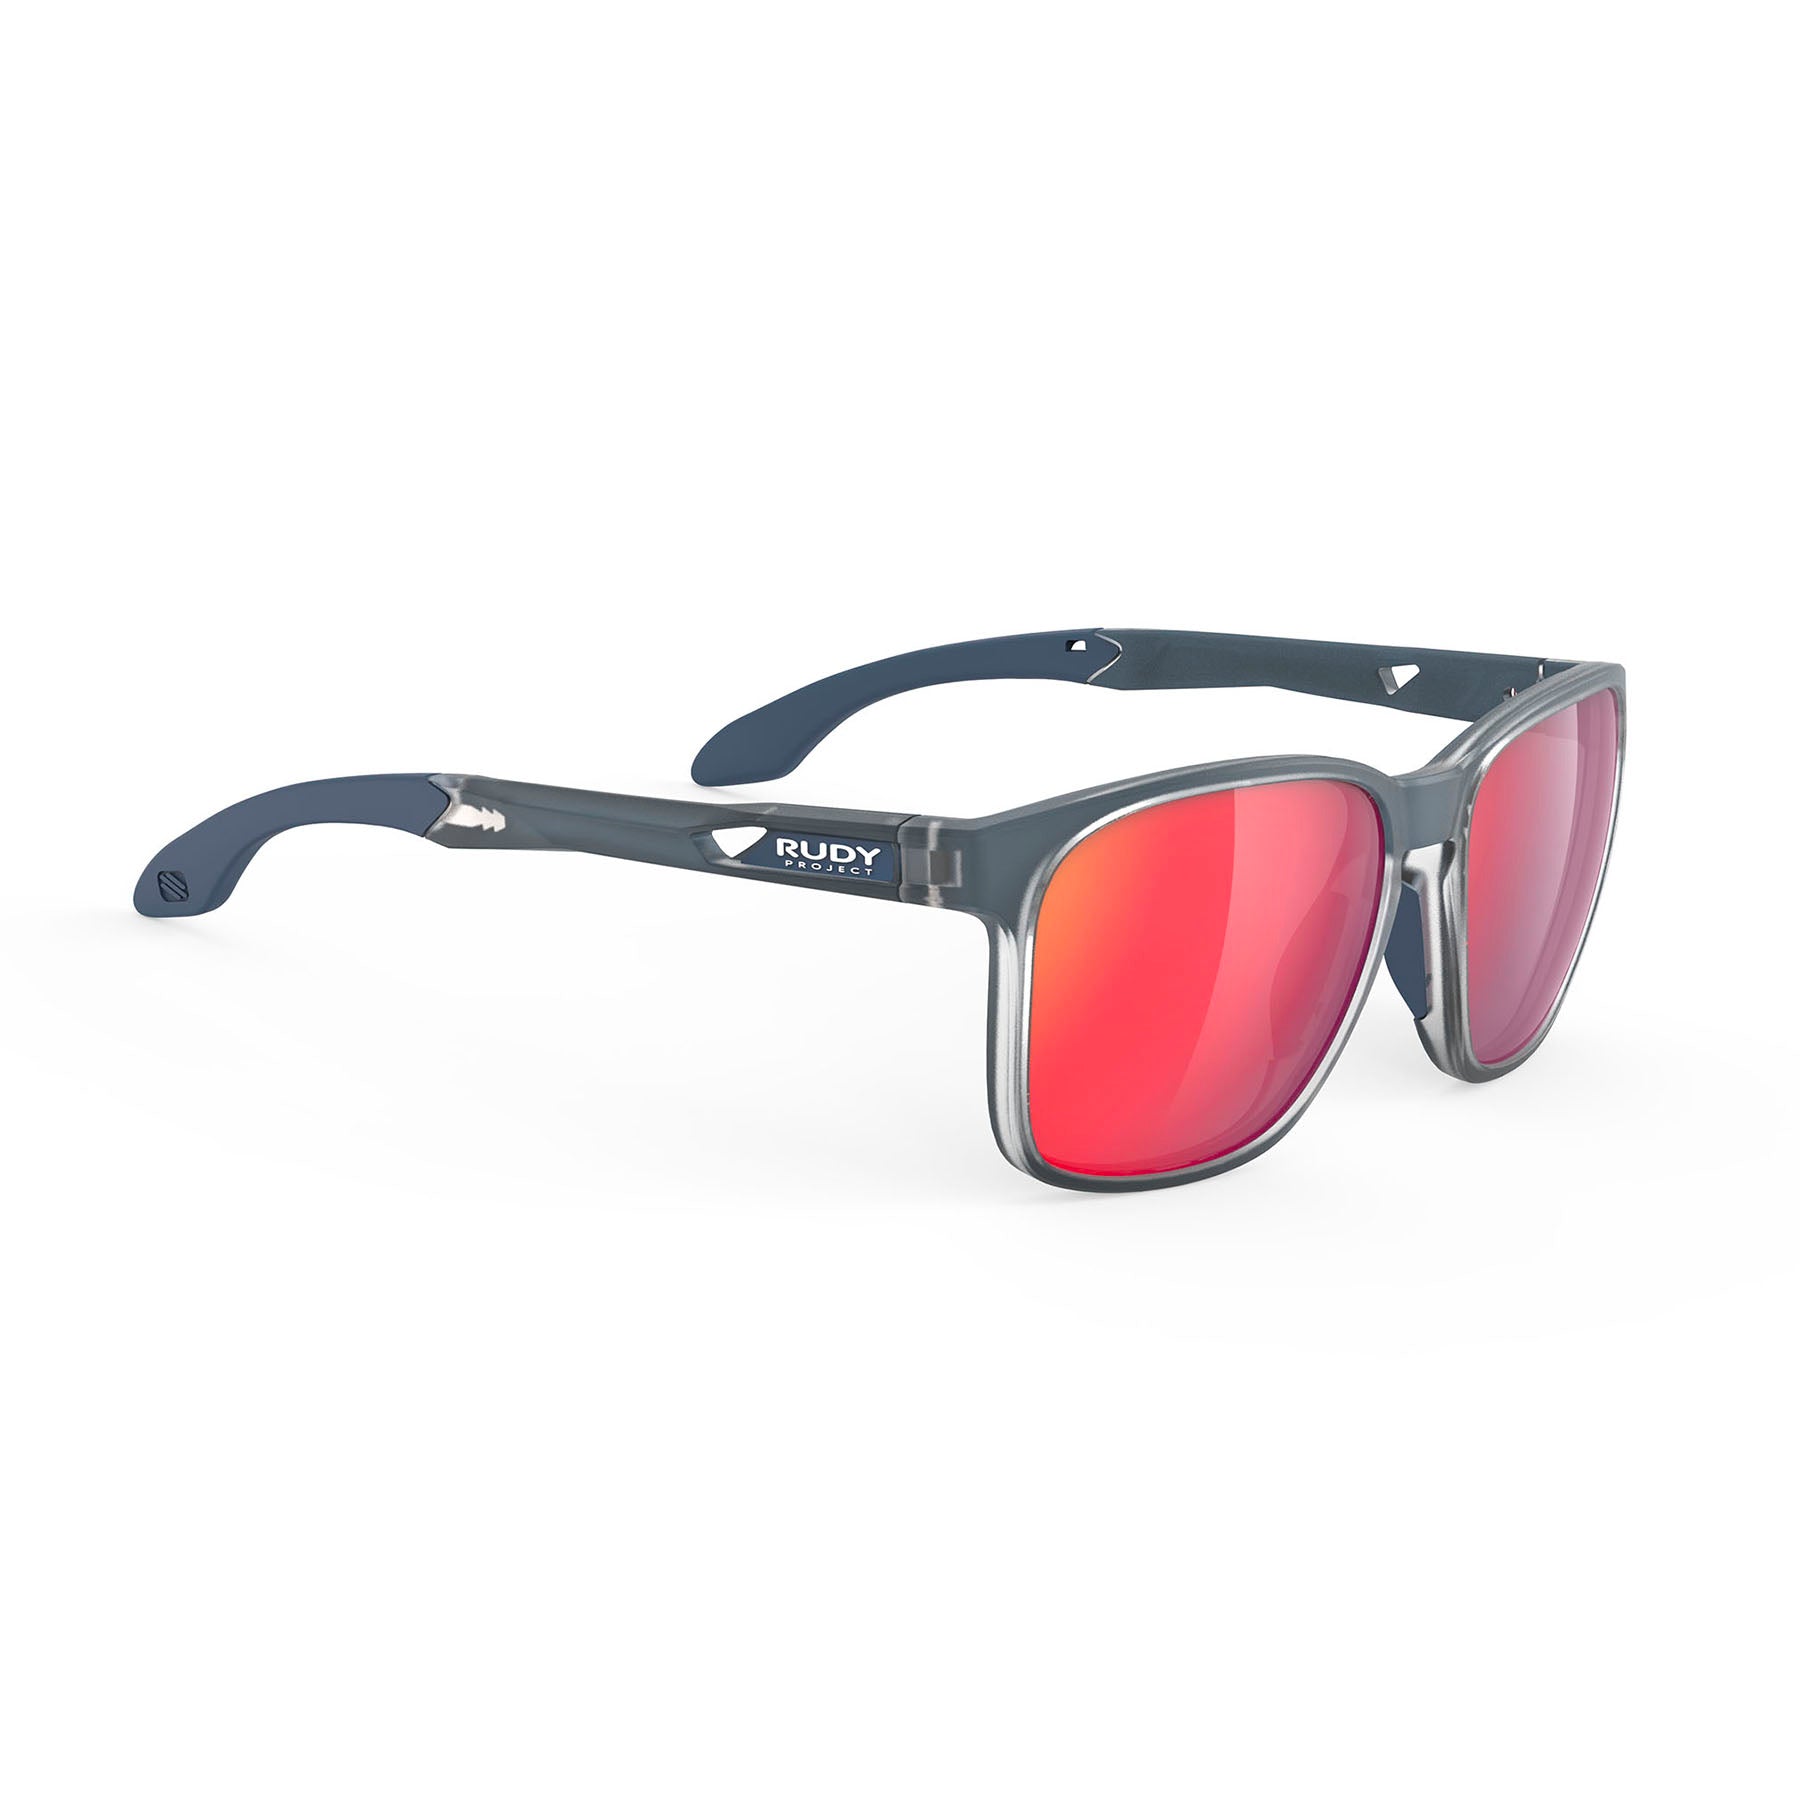 Rudy Project Lightflow A prescription ready active lifestyle sunglasses#color_lightflow-a-ice-blue-metal-matte-frame-with-multilaser-red-lenses